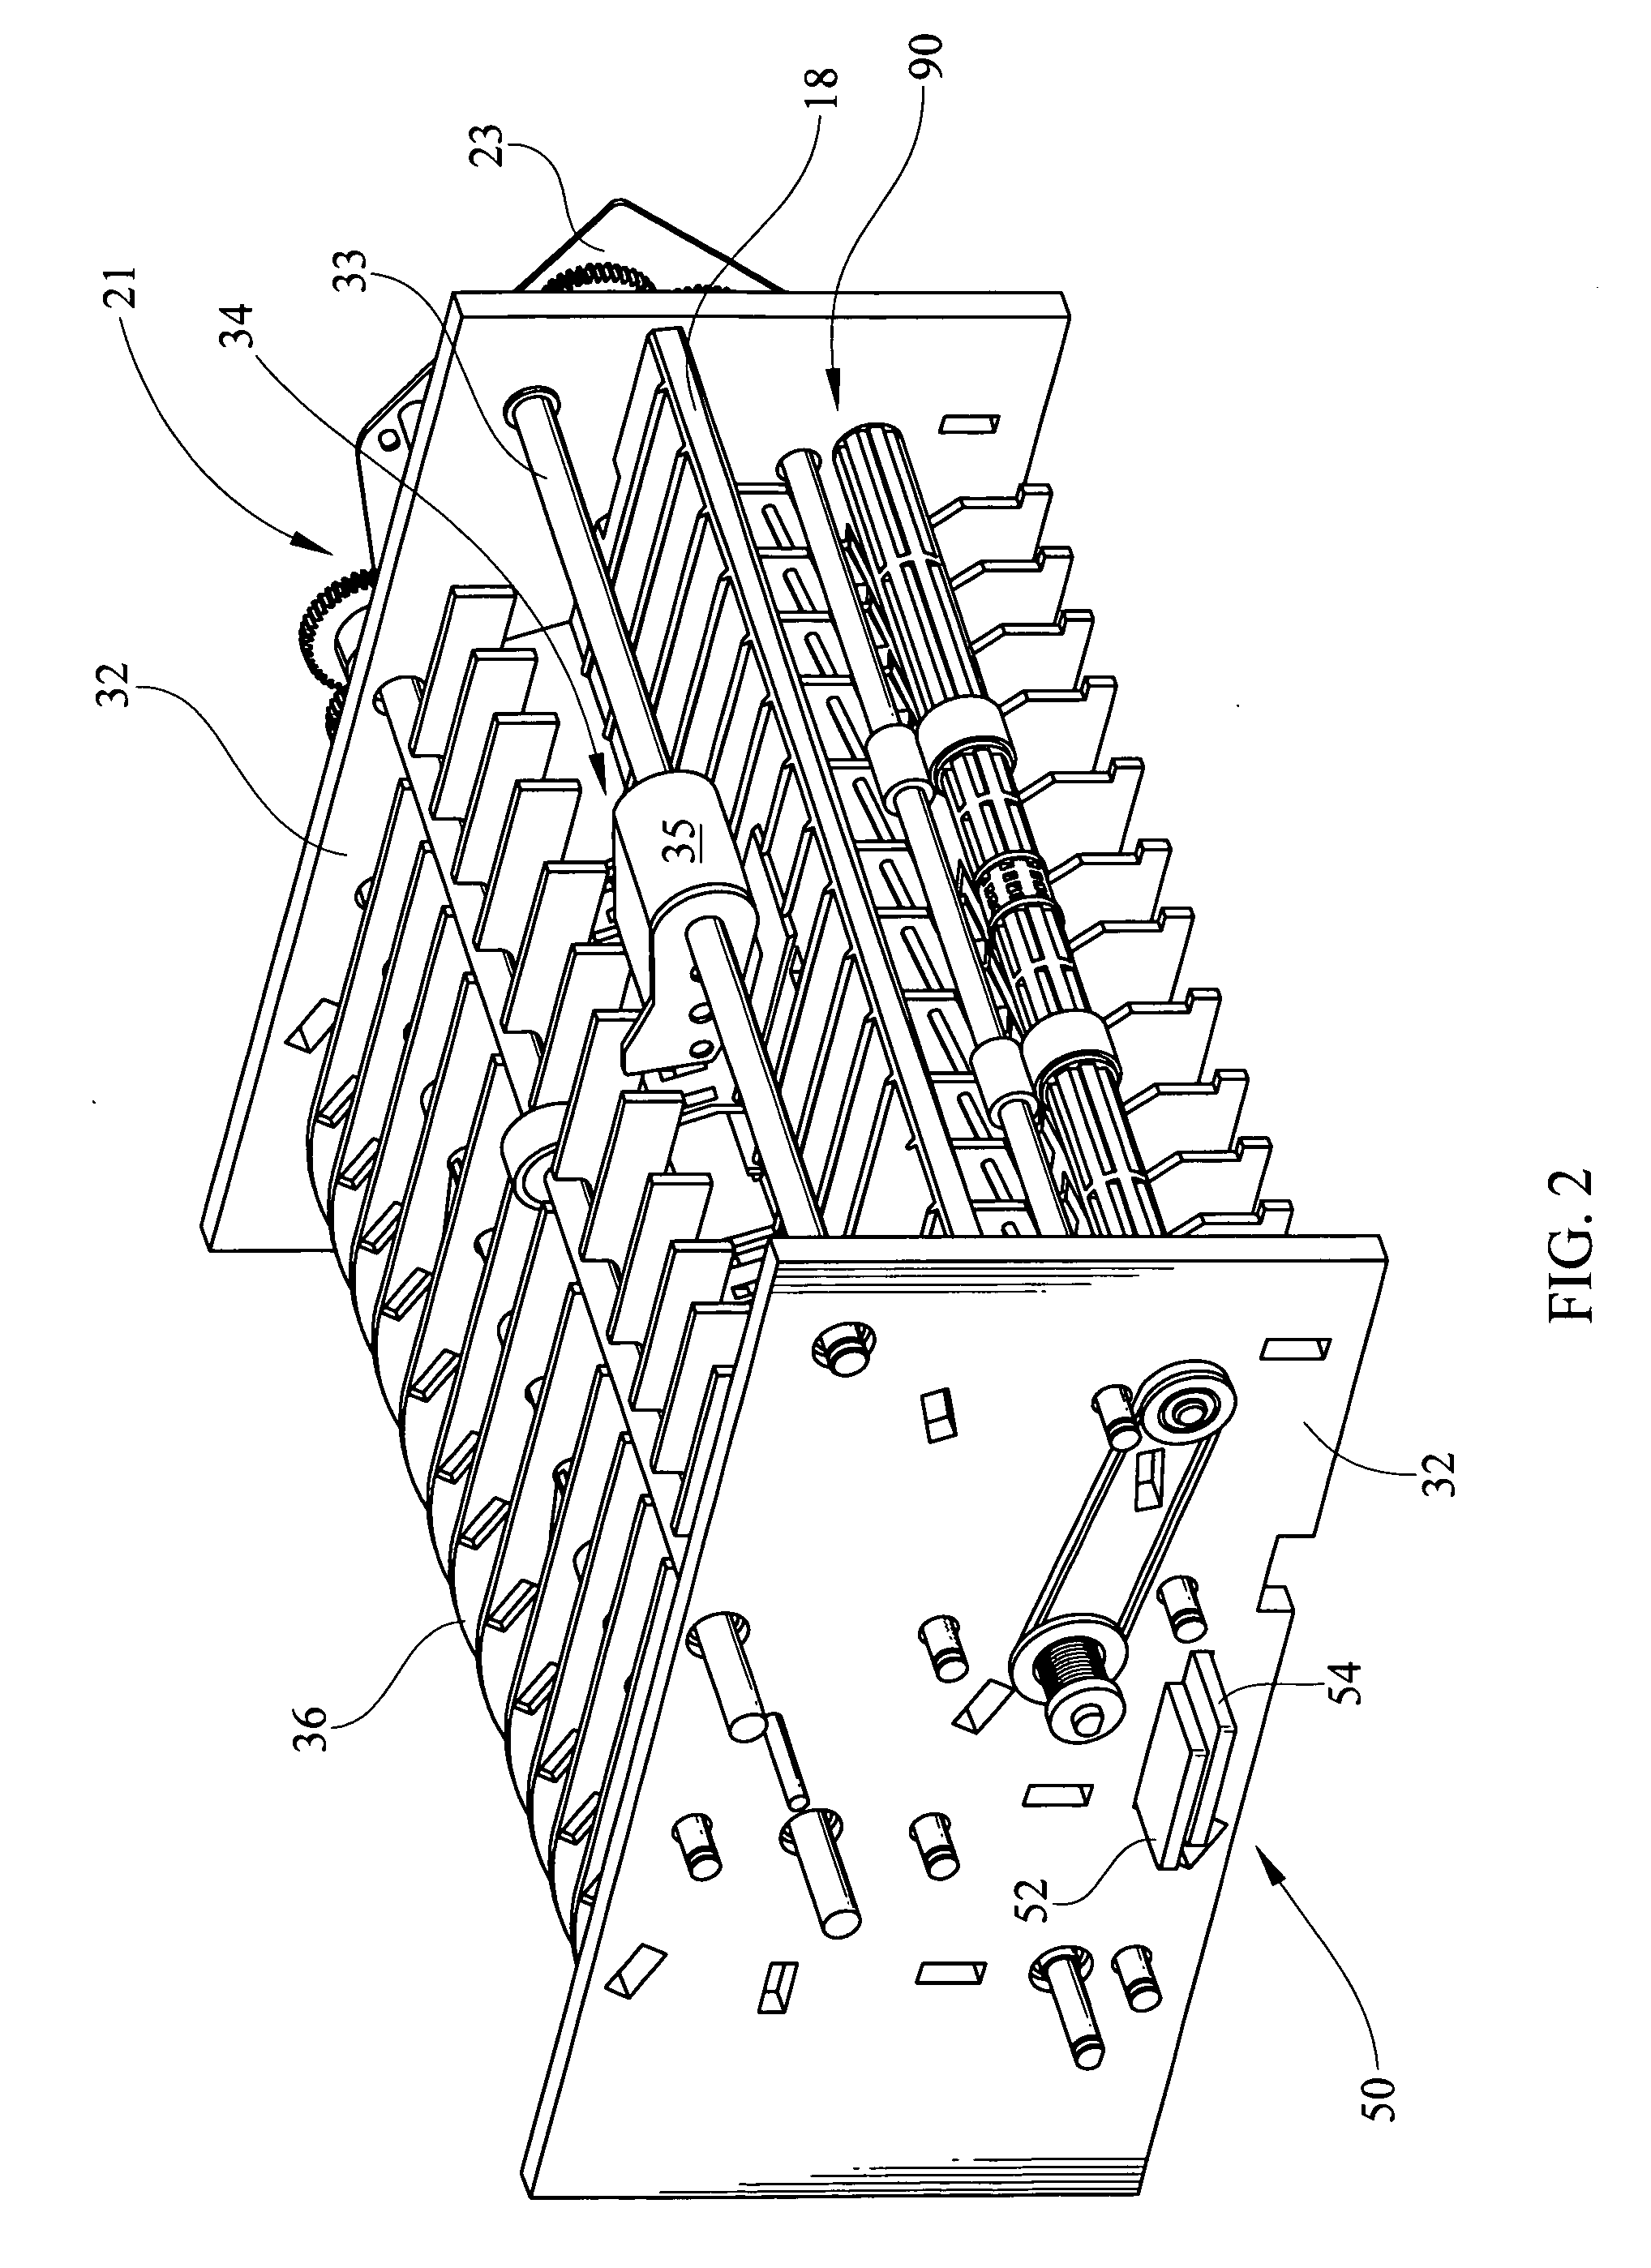 Apparatus for and method of creating a duplex scan using a single pass ADF